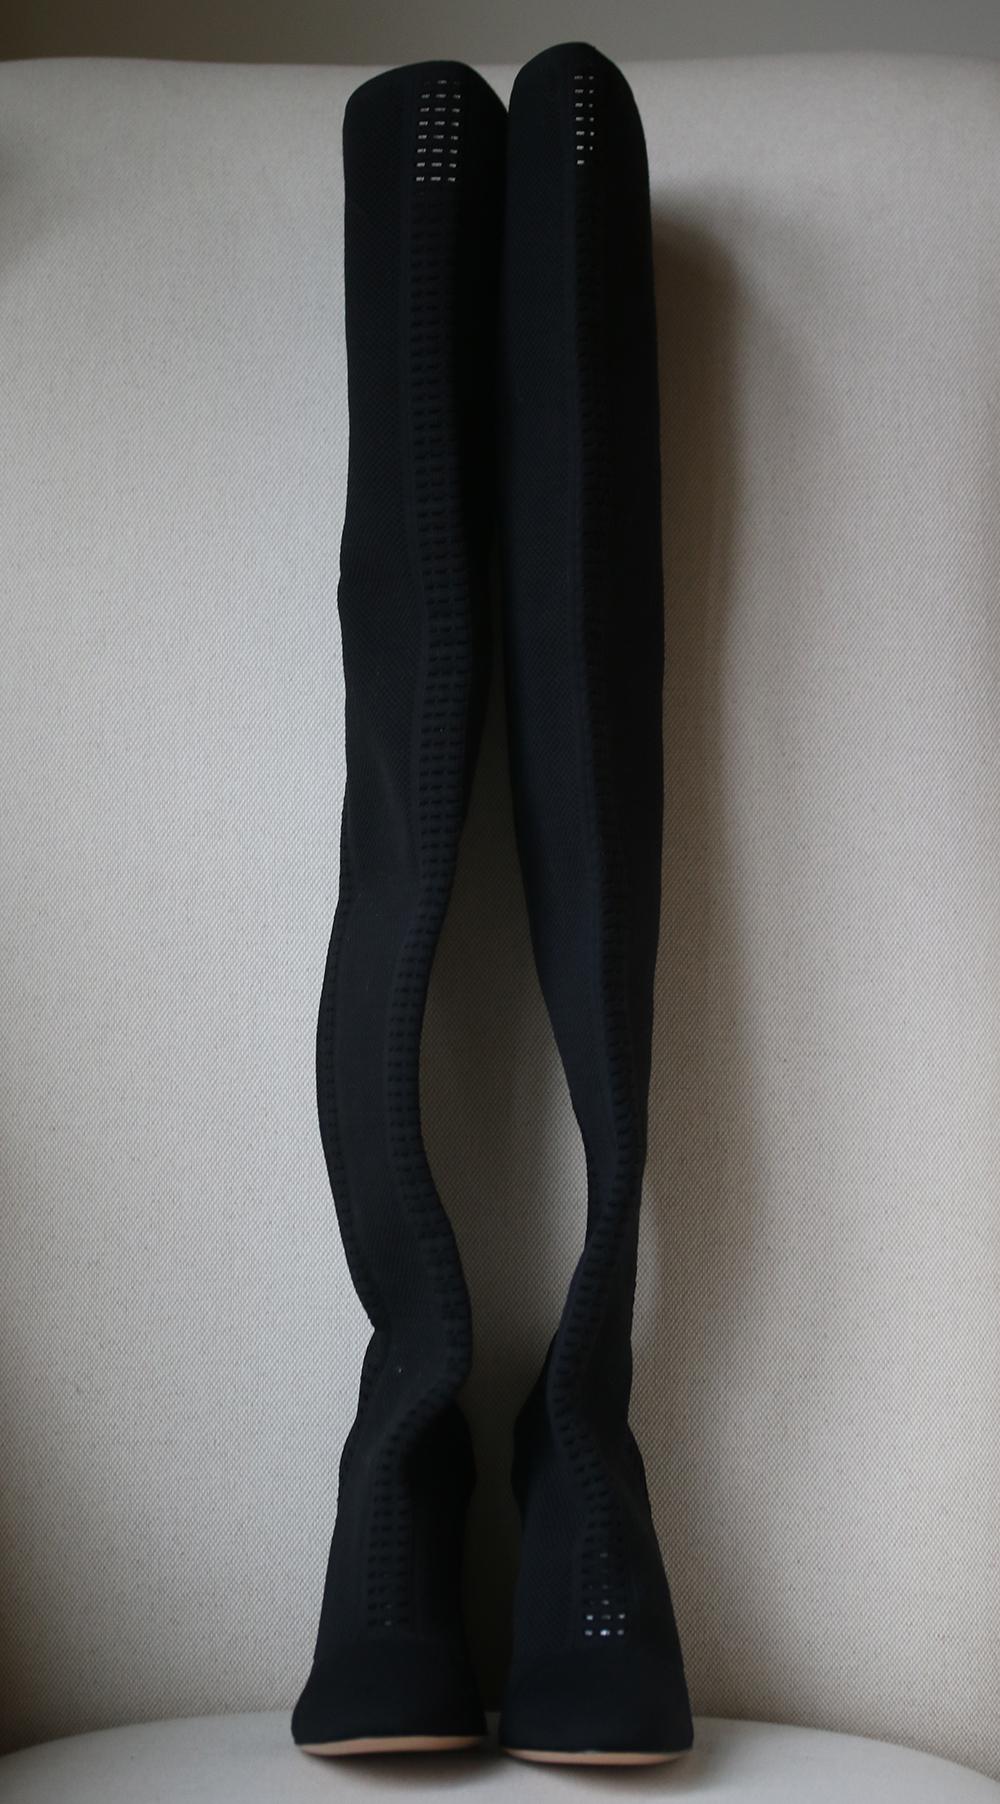 gianvito rossi thigh high boots